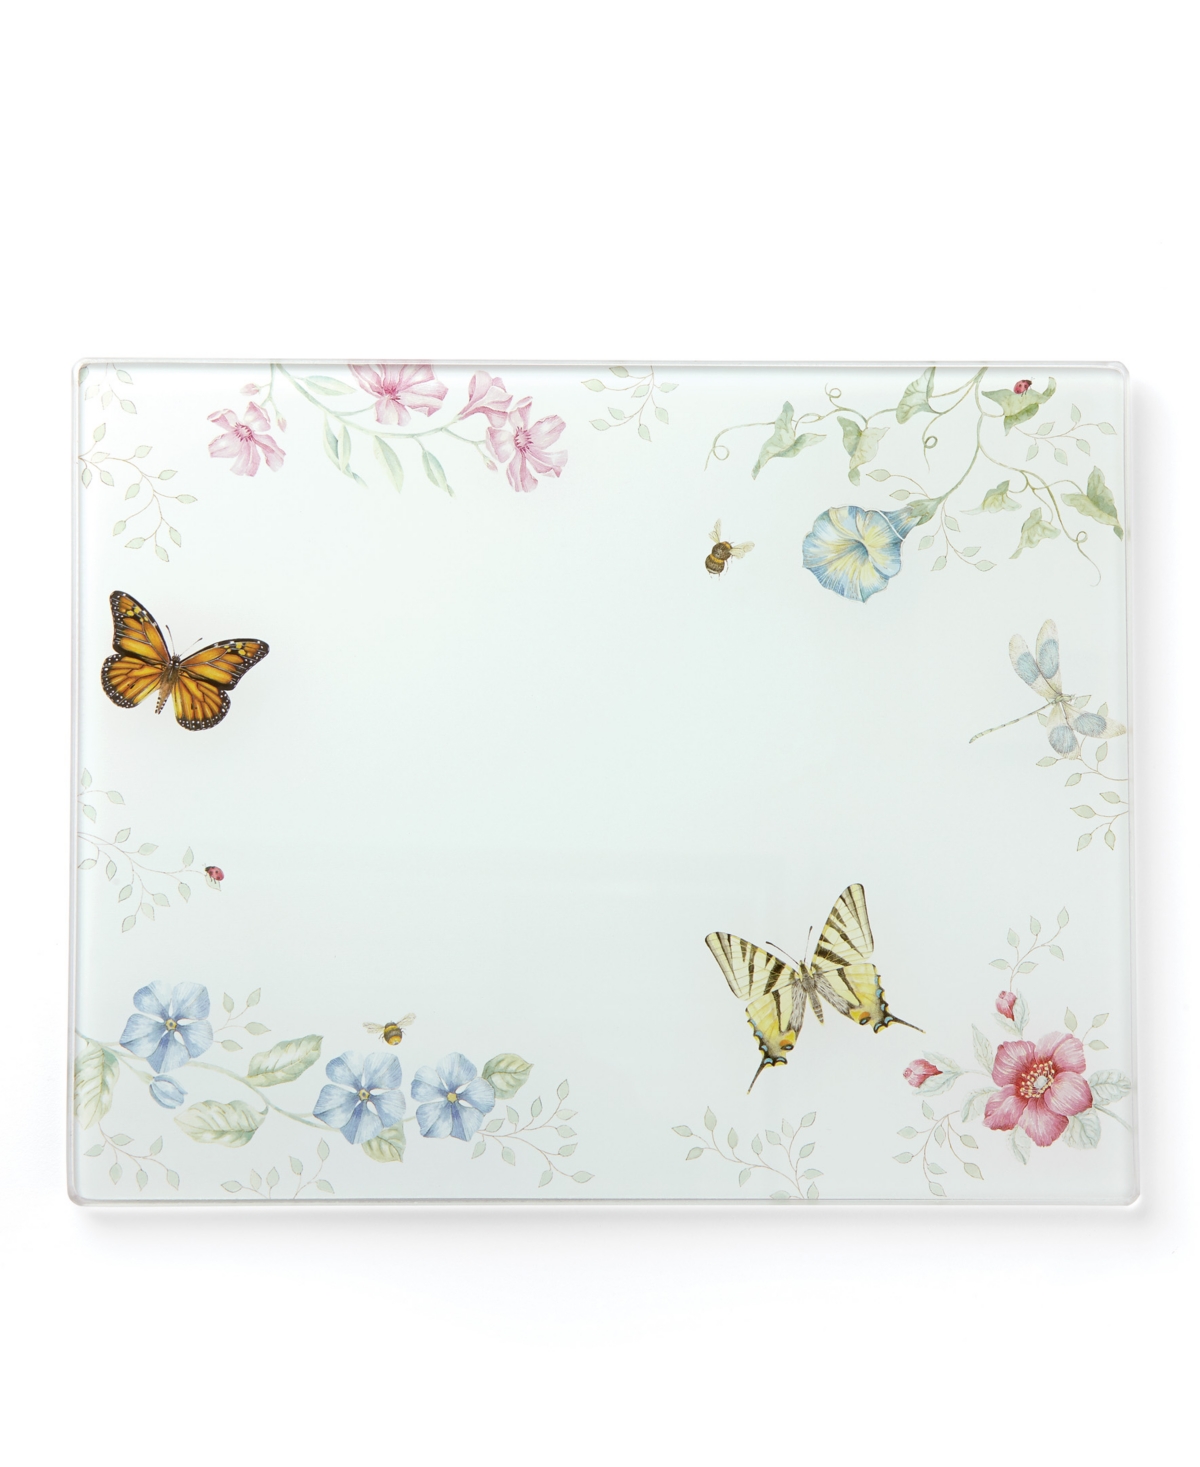 Lenox Butterfly Meadow Kitchen Large Glass Board, Created For Macy's In White Body W,pastel Floral And Botanical